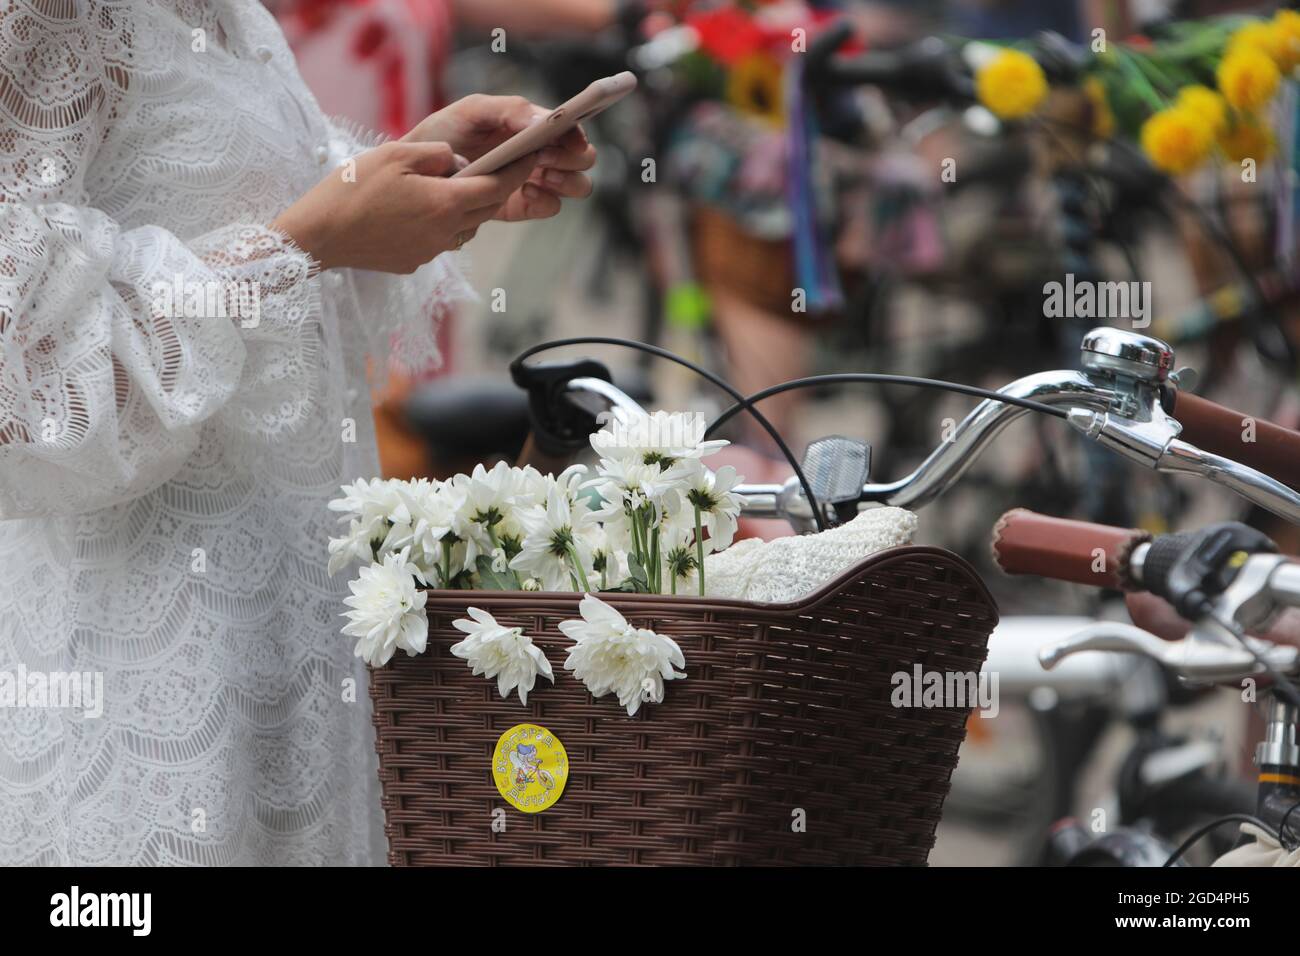 KYIV, UKRAINE - AUGUST 7, 2021 - A woman in a white lace dress browses her smartphone next to a basket with white flowers attached to a bicycle as see Stock Photo